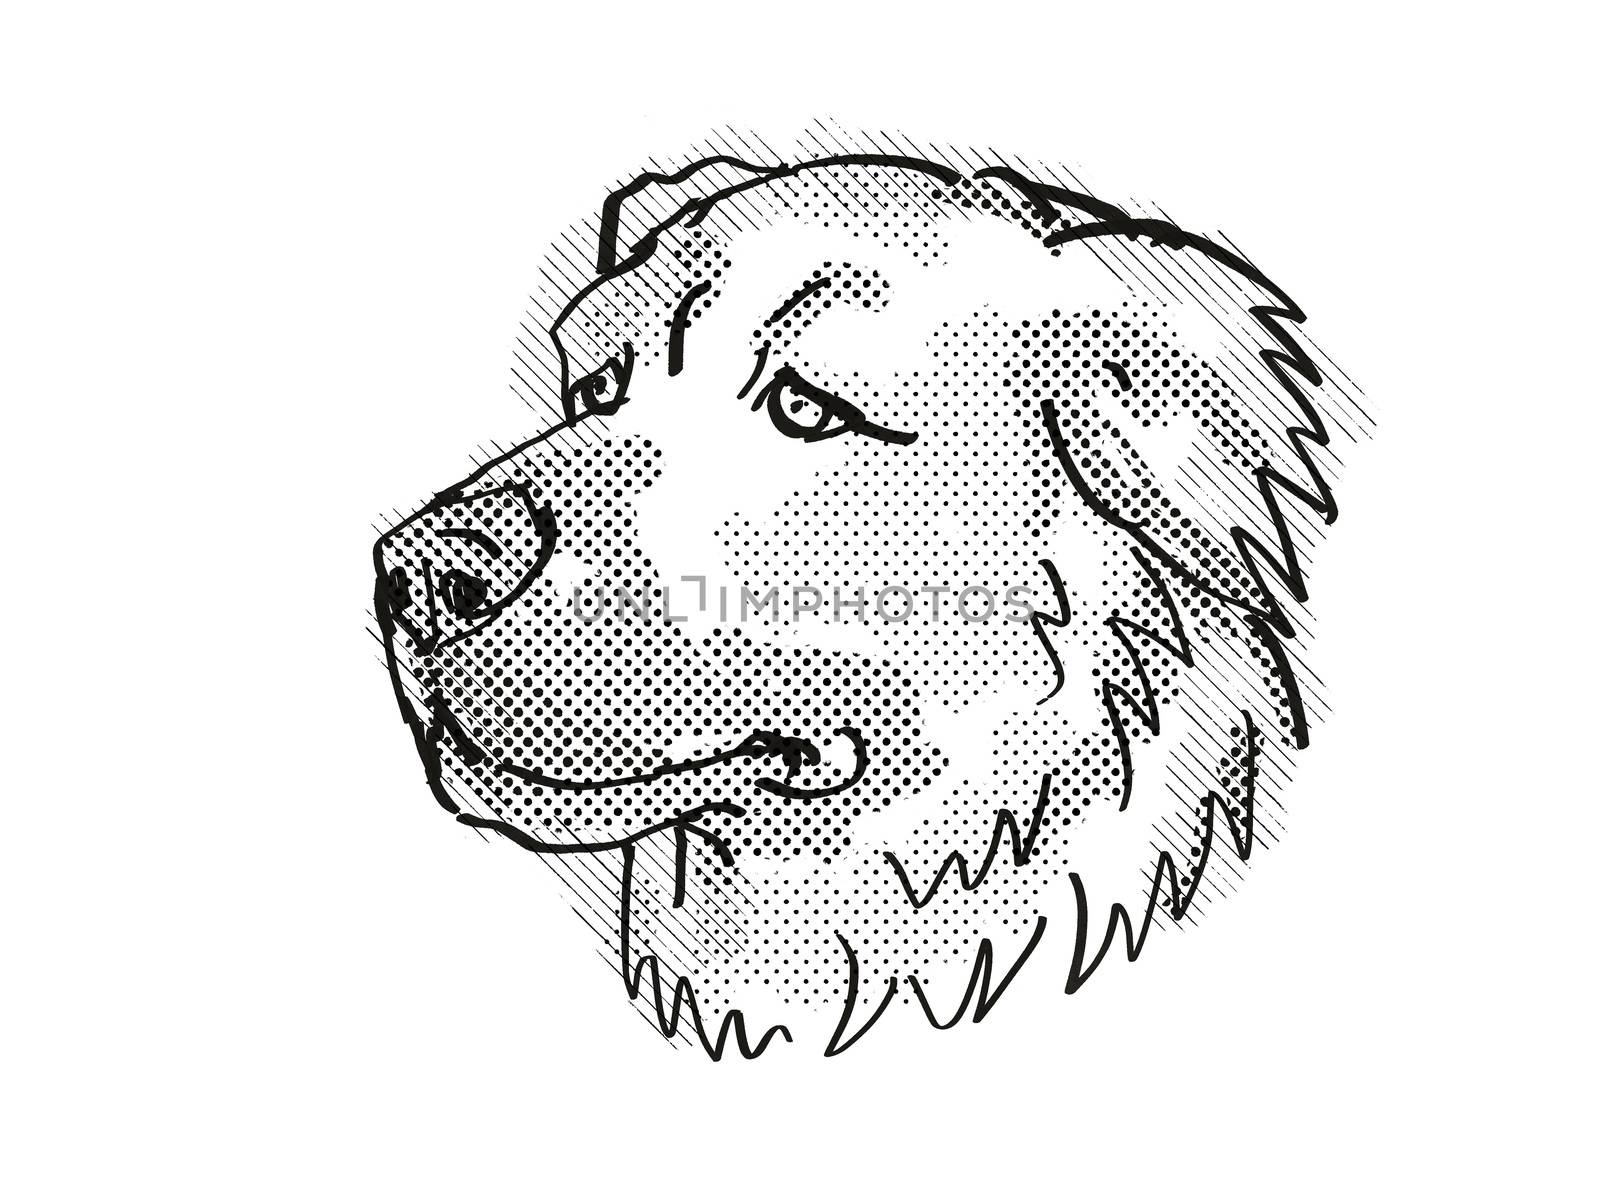 Retro cartoon style drawing of head of a Caucasian Shepherd or Caucasian Mountain Dog or  Baskhan Pariy, a domestic dog breed in black and white.